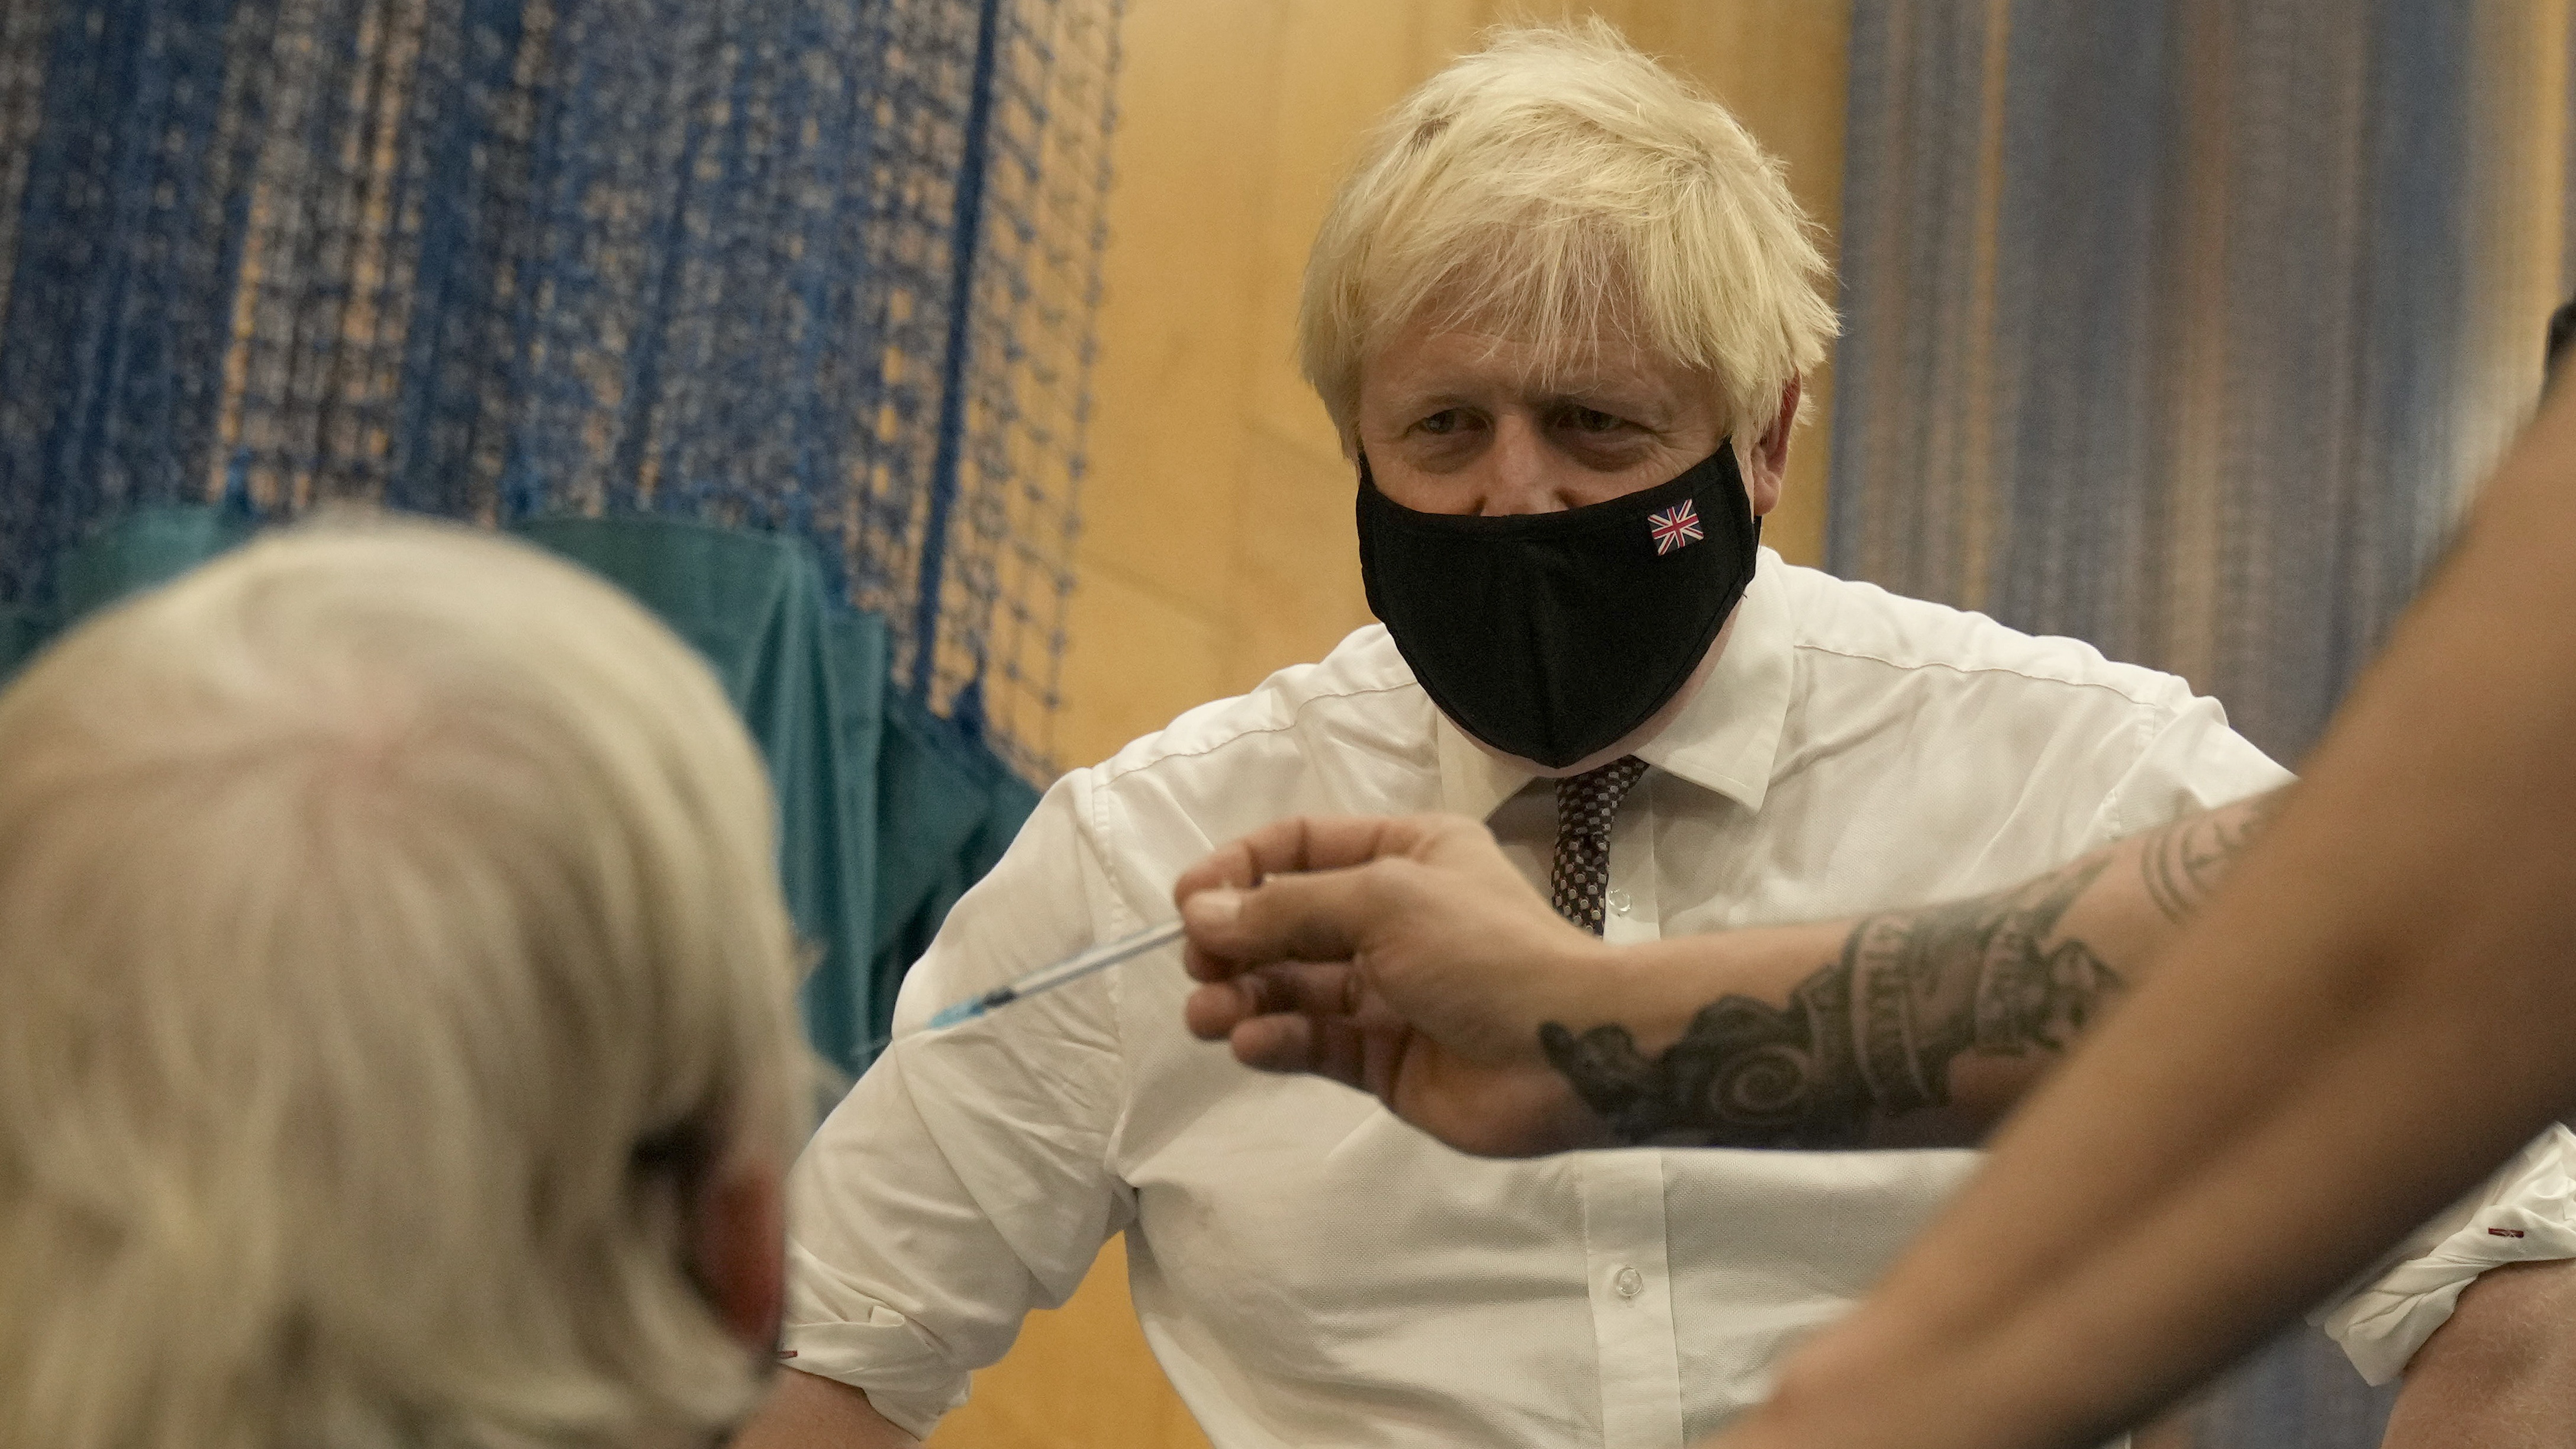 Boris Johnson watches as a booster jab is administered in Little Venice, London